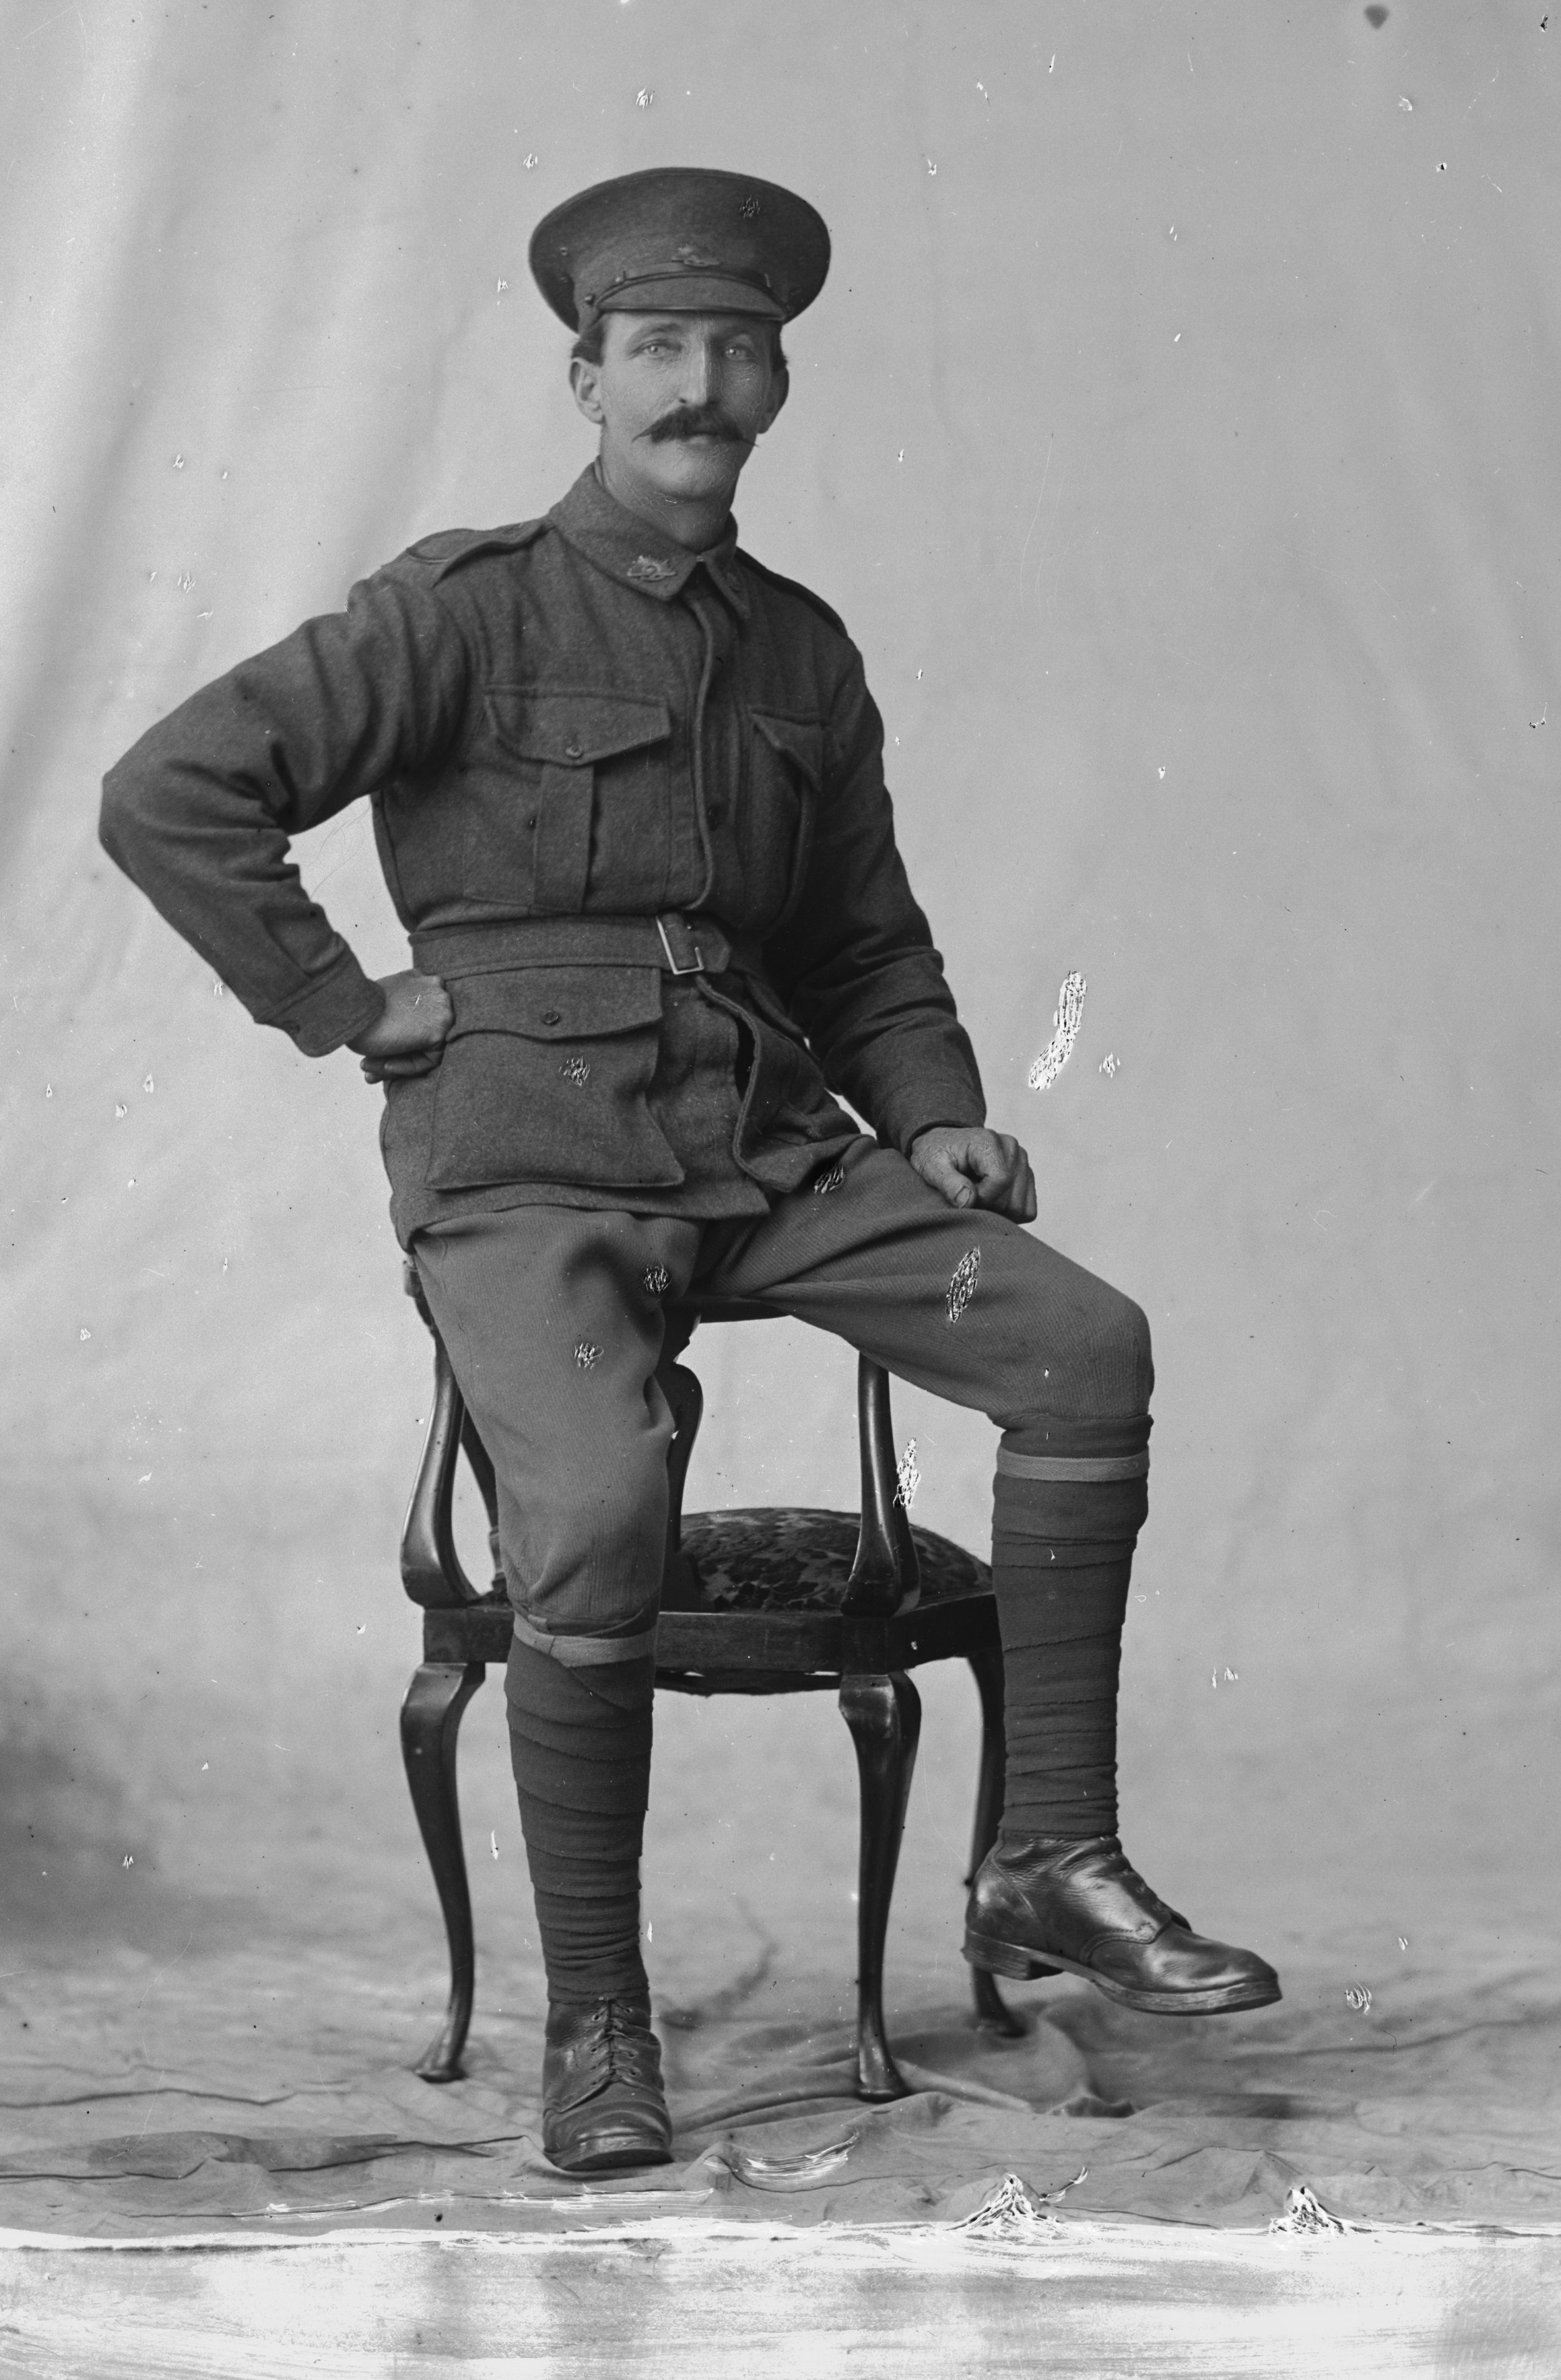 Photographed at the Dease Studio, 117 Barrack Street Perth WA Image courtesy of the State Library of Western Australia: 108340PD